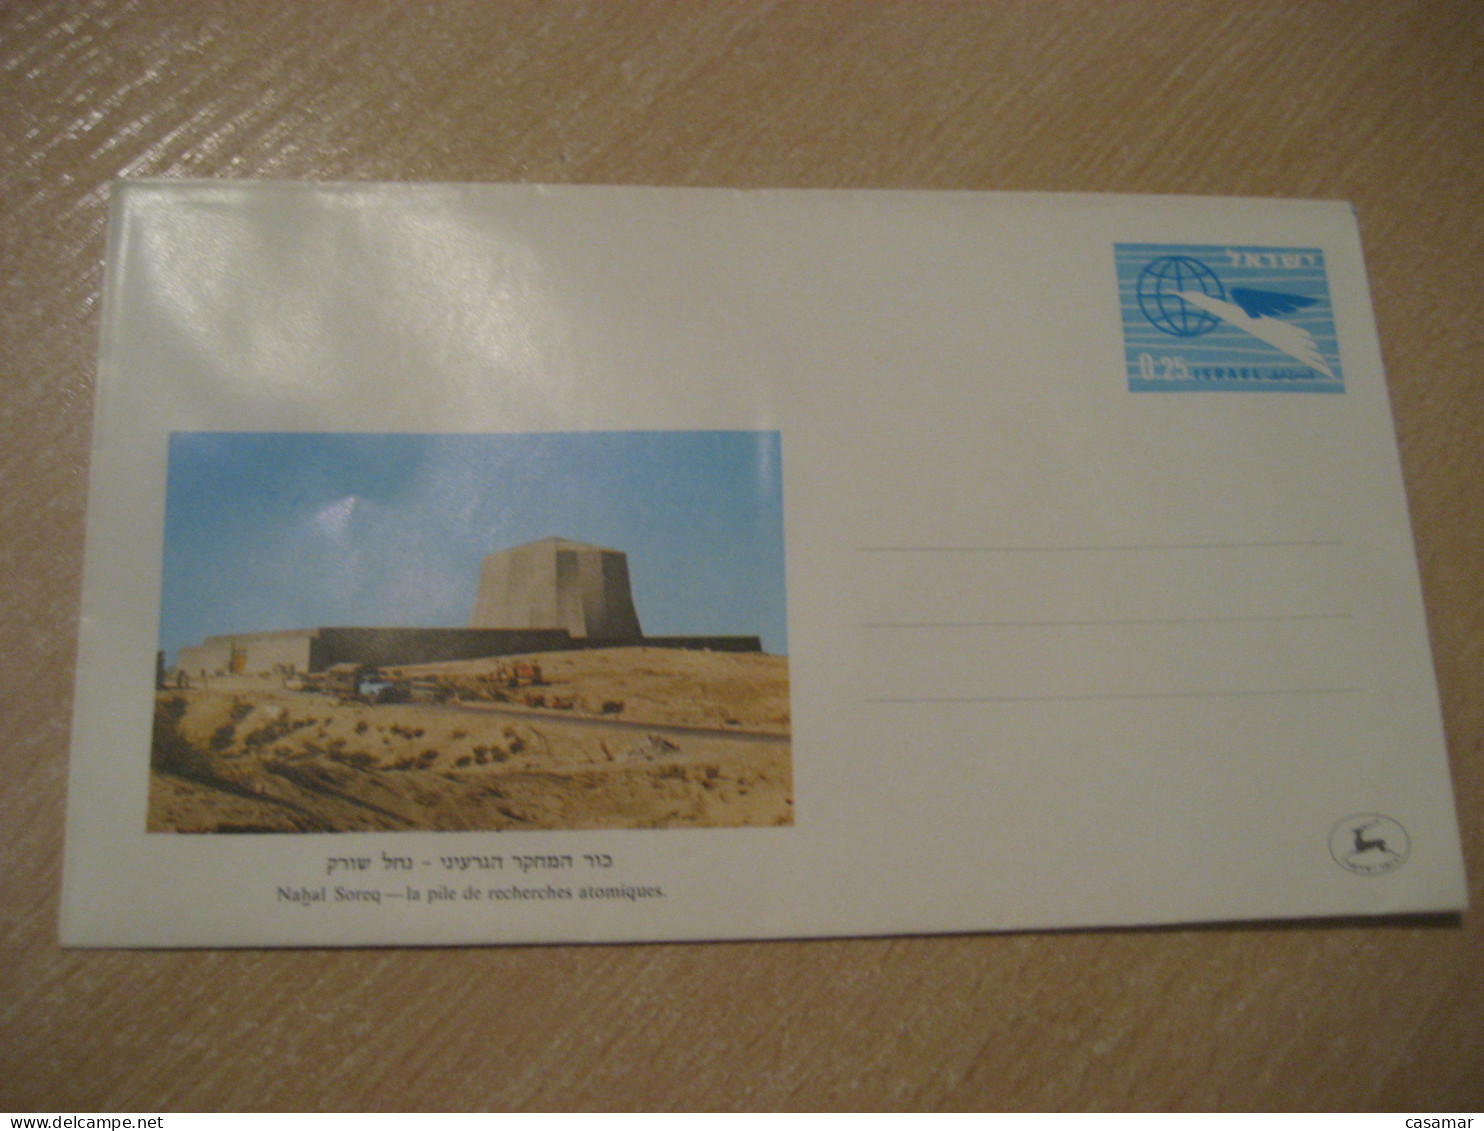 NAHAL SOREQ La Pile De Recherches Atomiques The Atomic Research Stack Physics Postal Stationery Cover ISRAEL Physique - Fysica